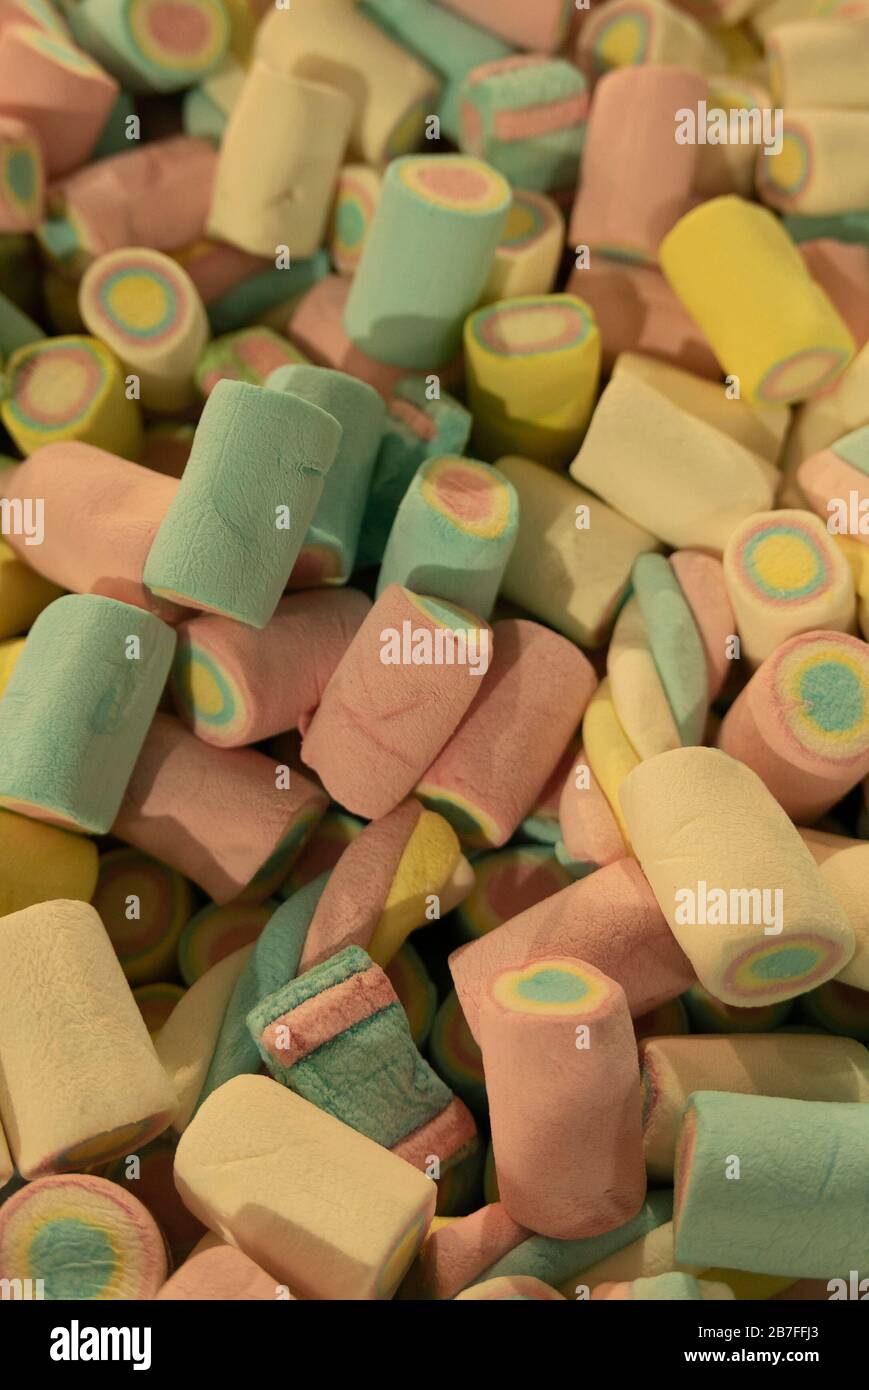 Colorful sweets Stock Photo